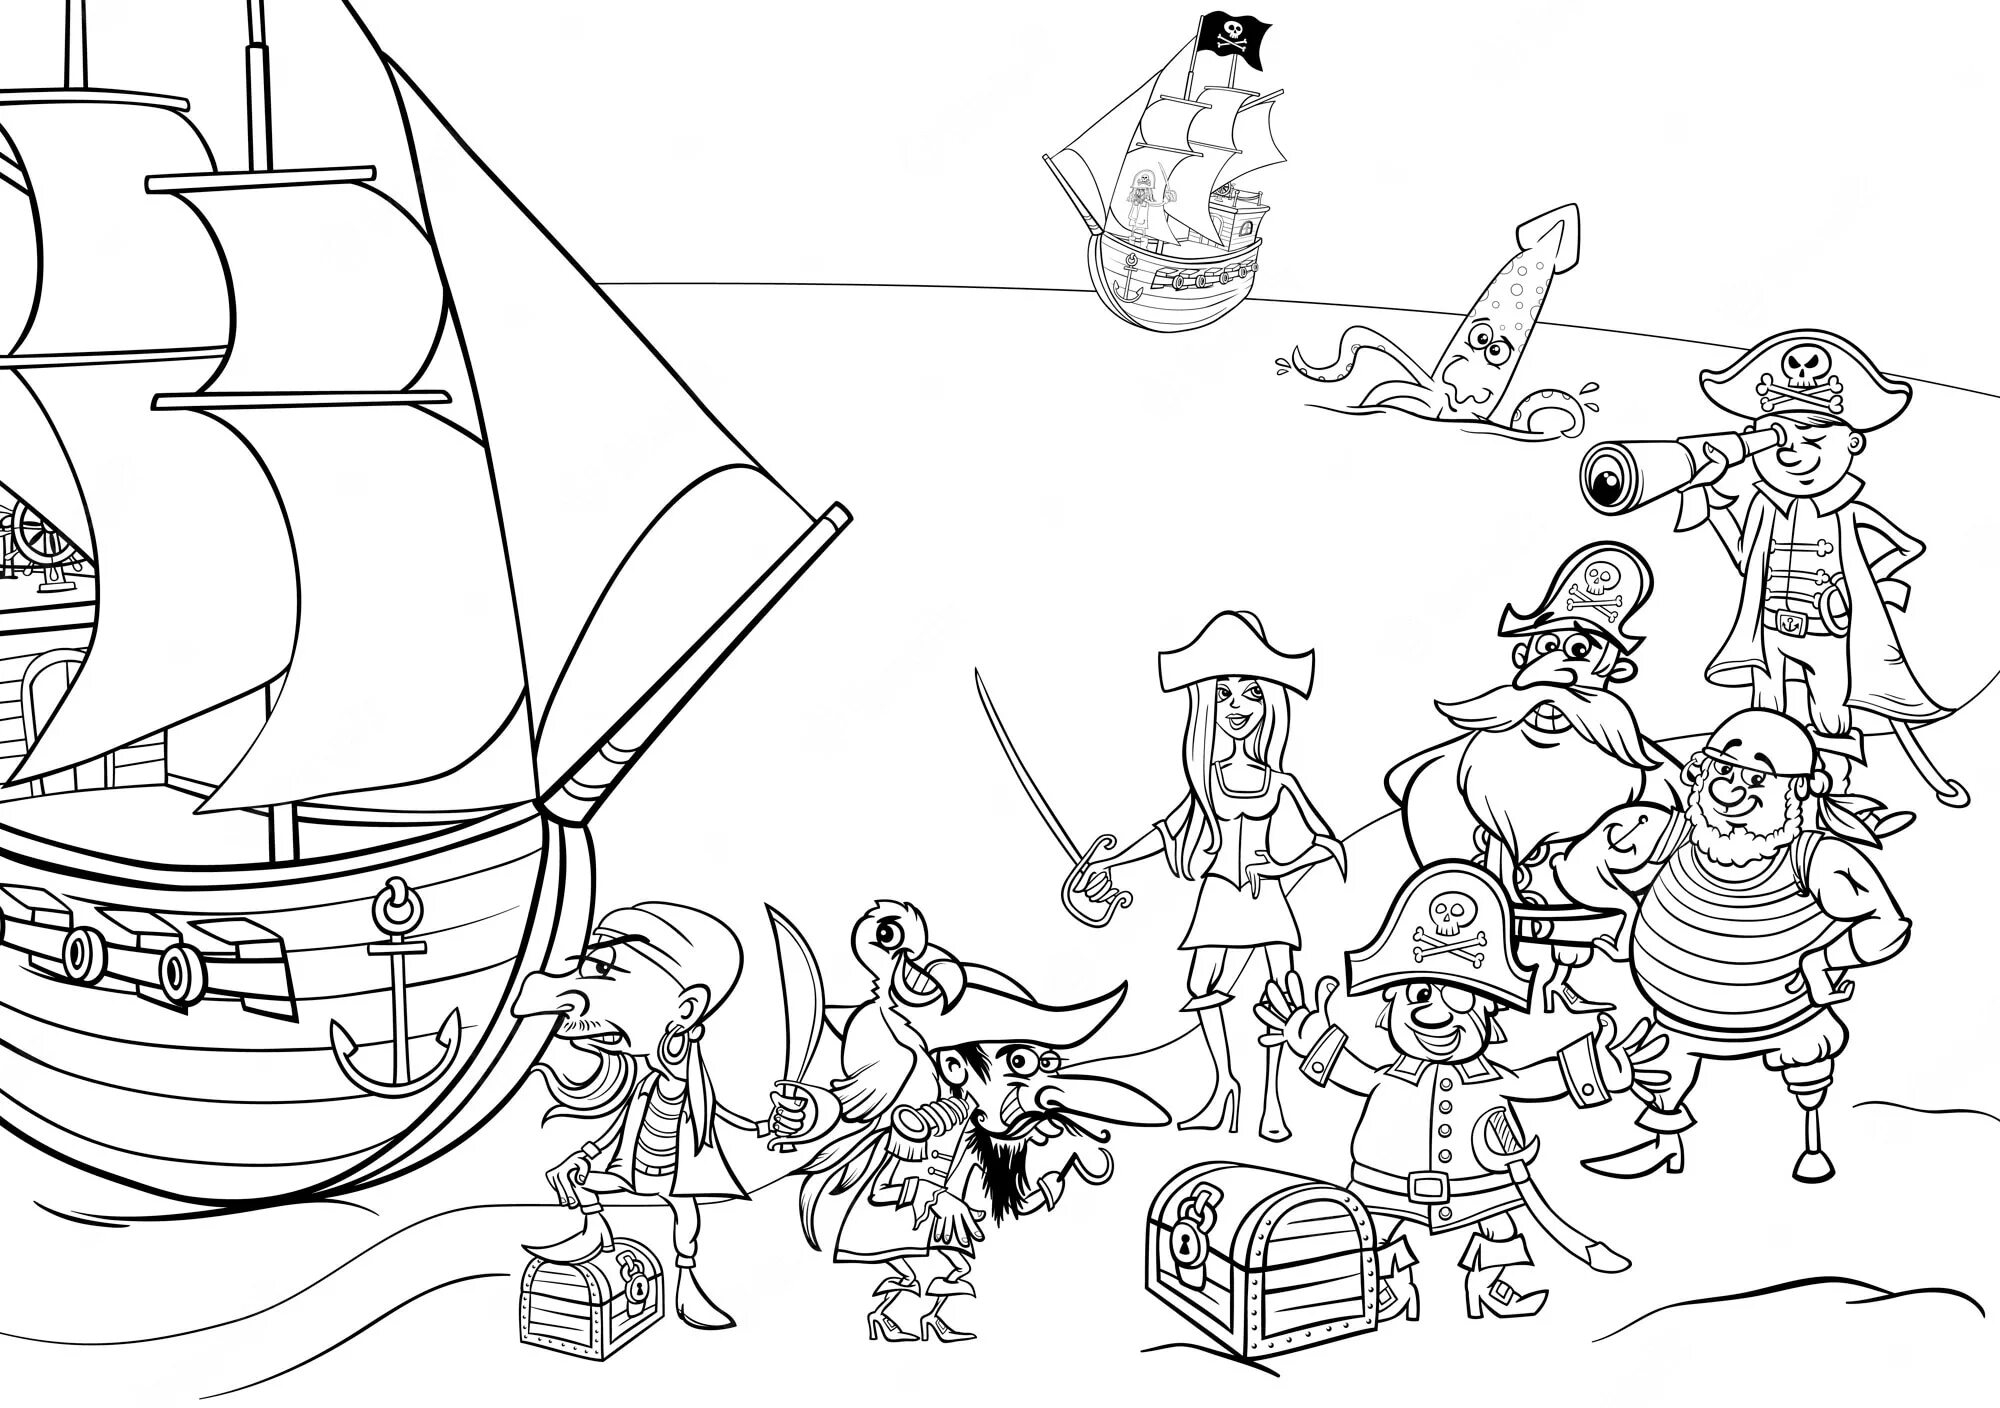 Exciting pirate ship coloring book for kids